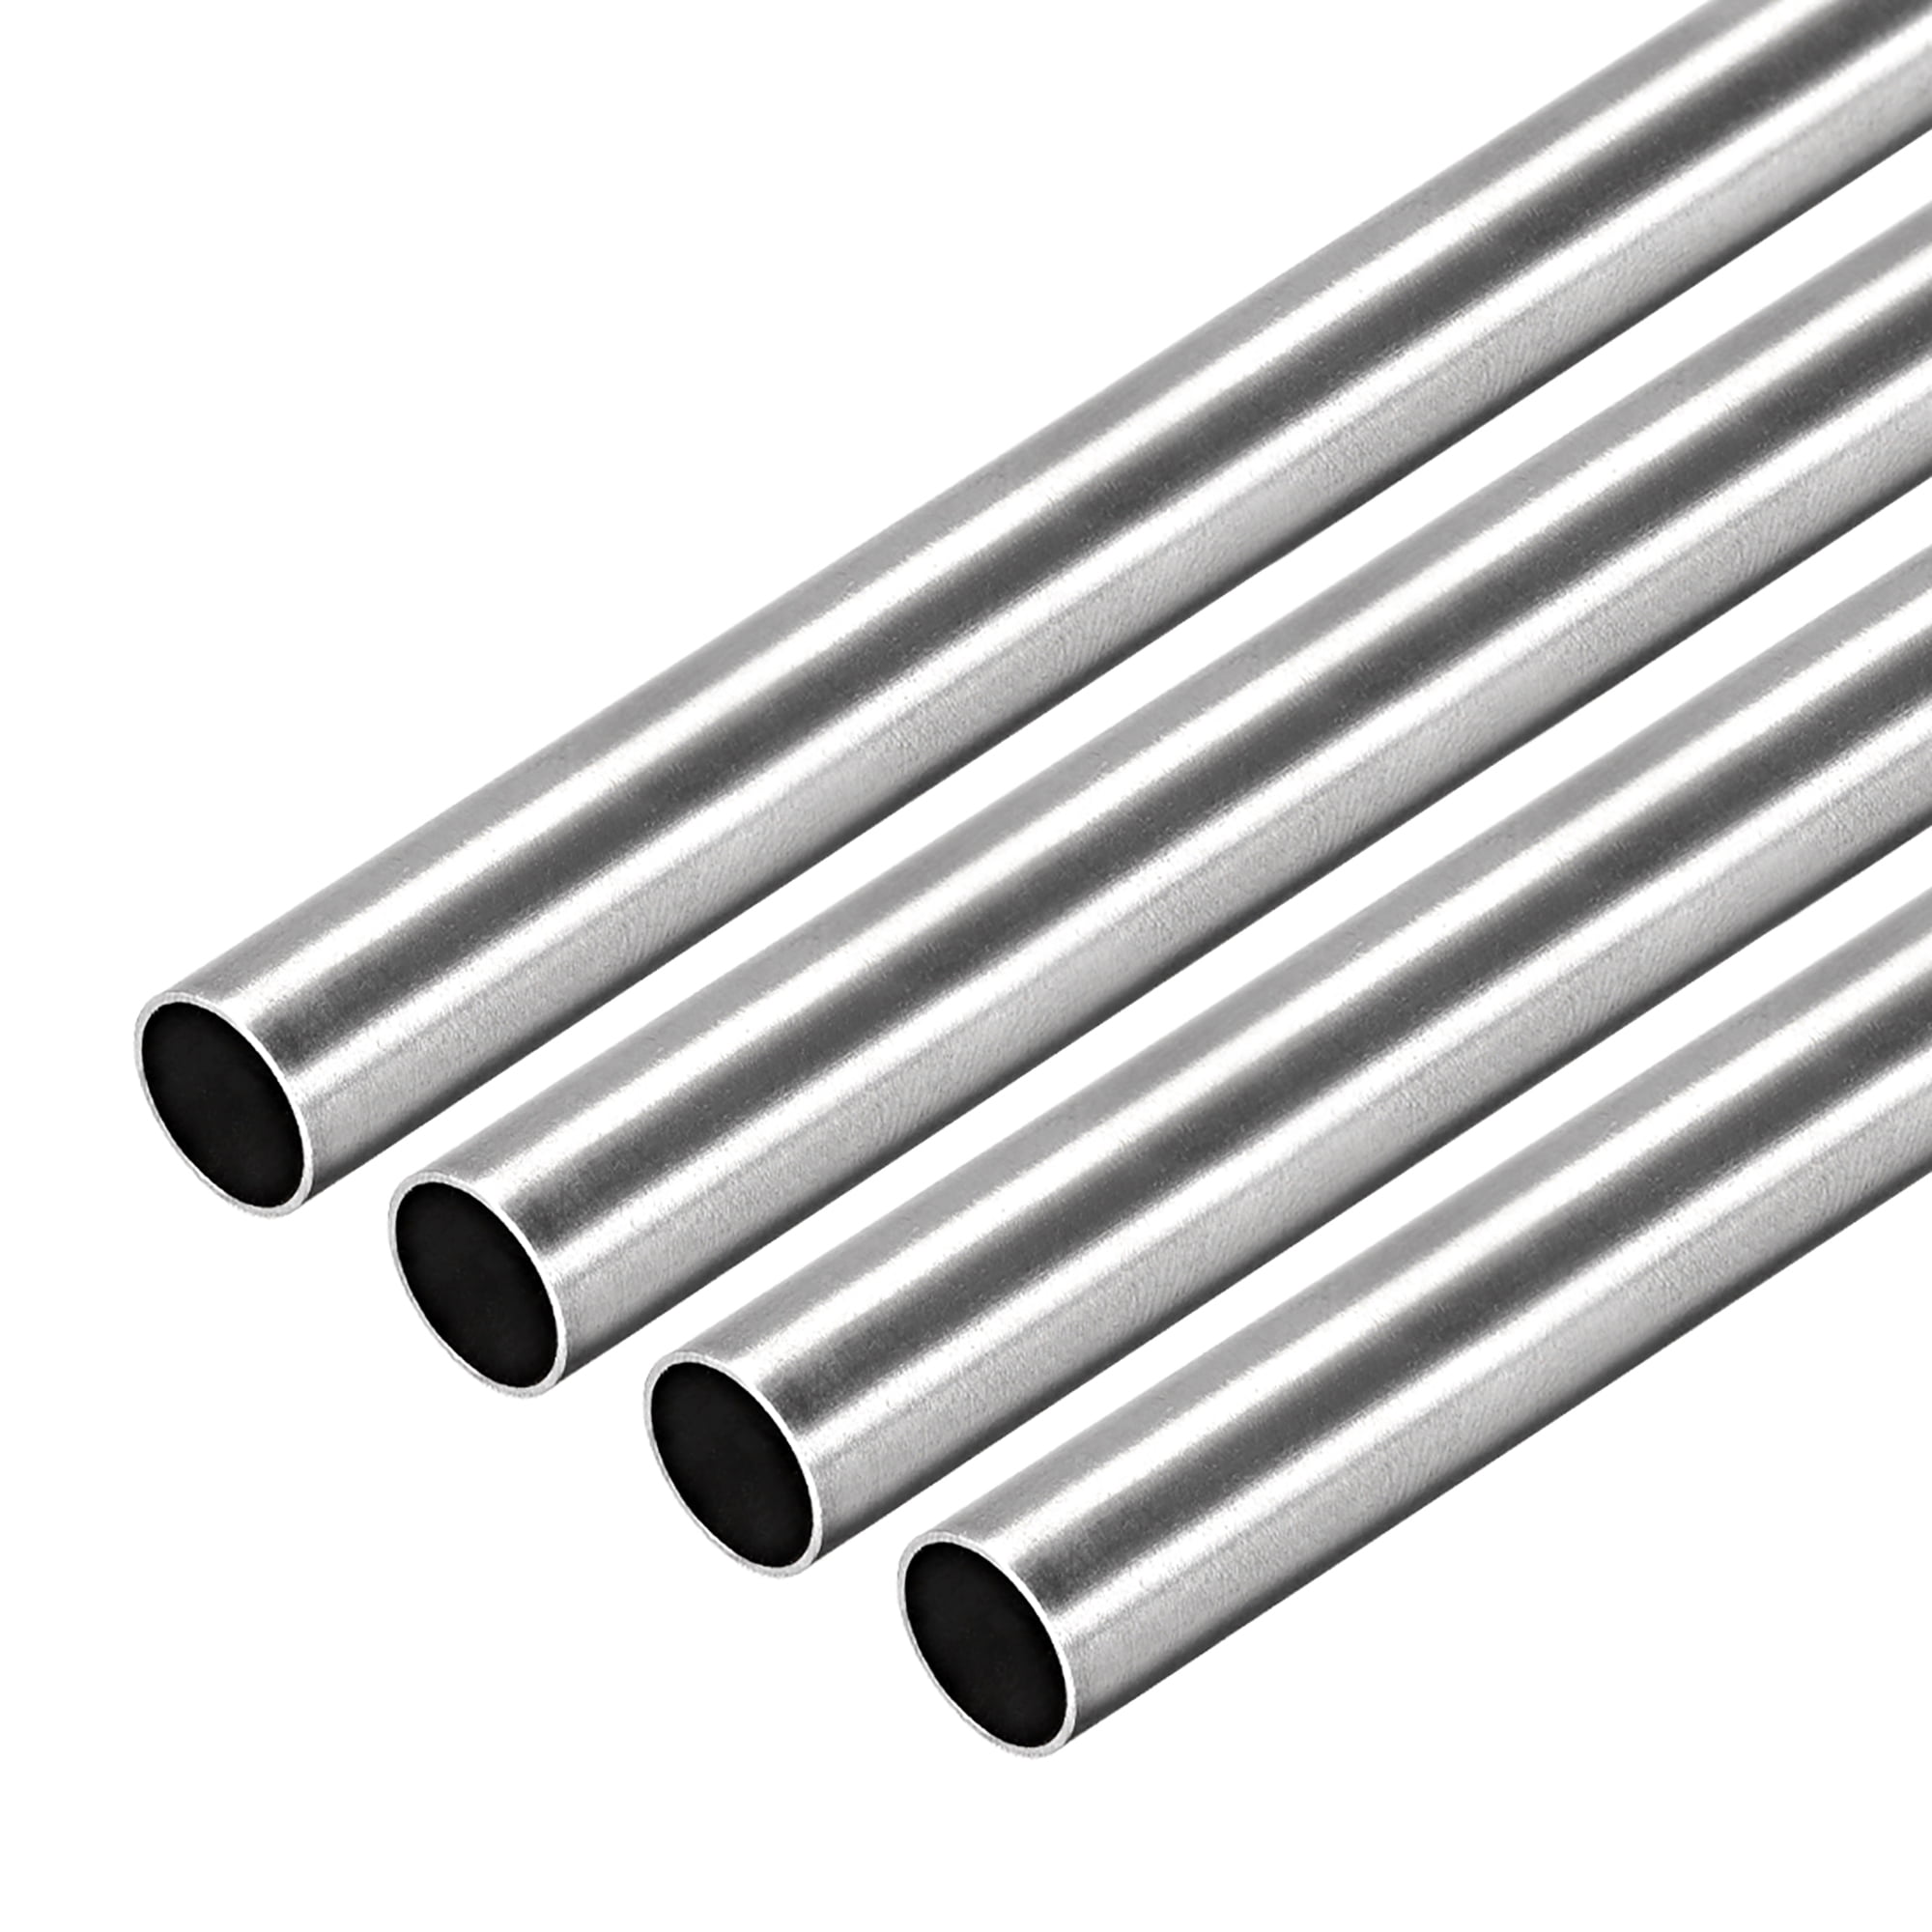 304 Stainless Steel Round Tubing 9mm OD 0.4mm Wall Thickness 250mm Length 2 Pcs